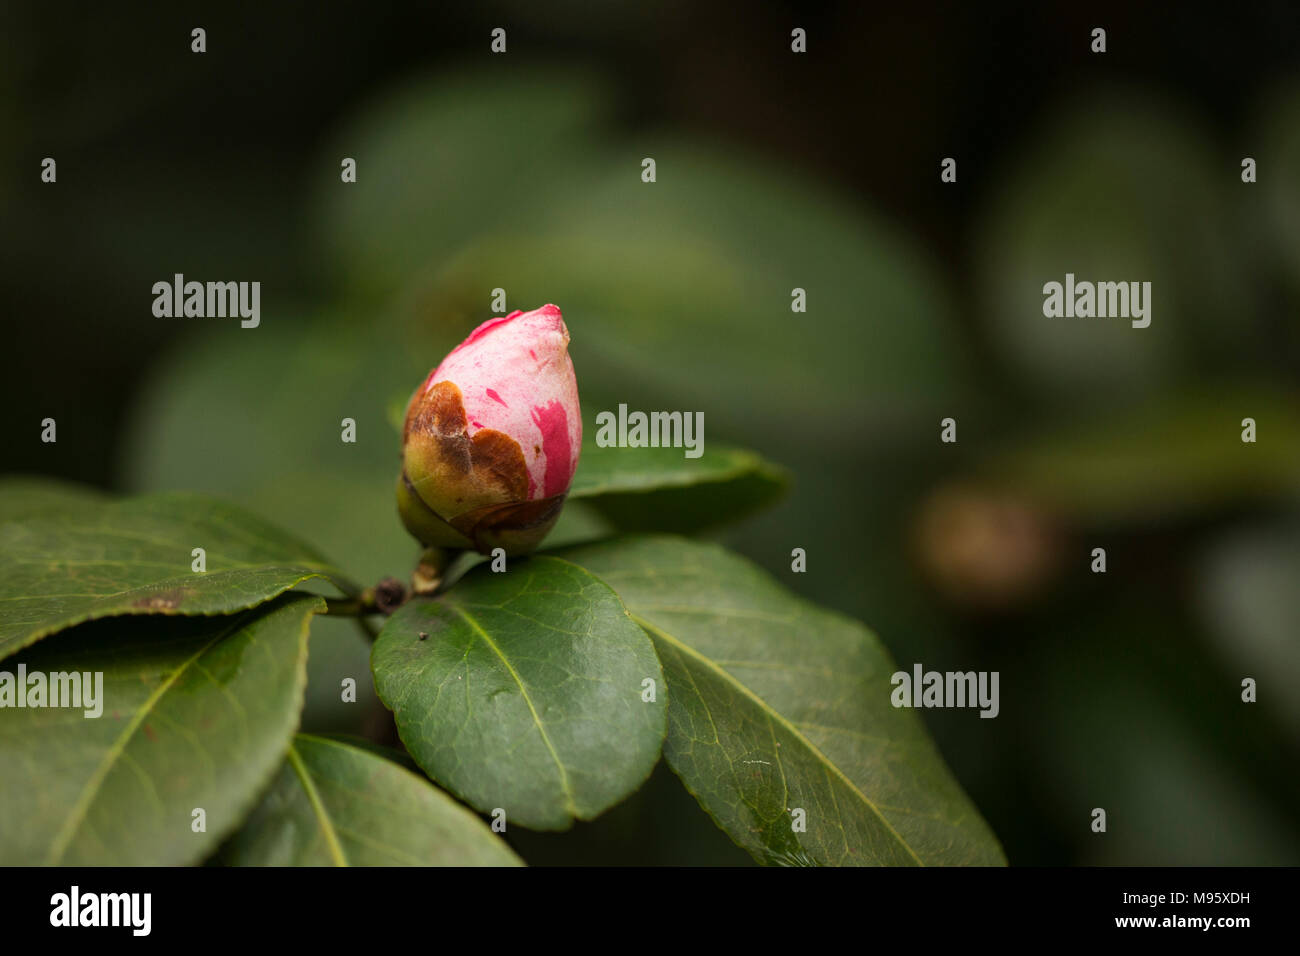 Candy striped camellia (camellia japonica) growing on a bush in Atlanta Stock Photo